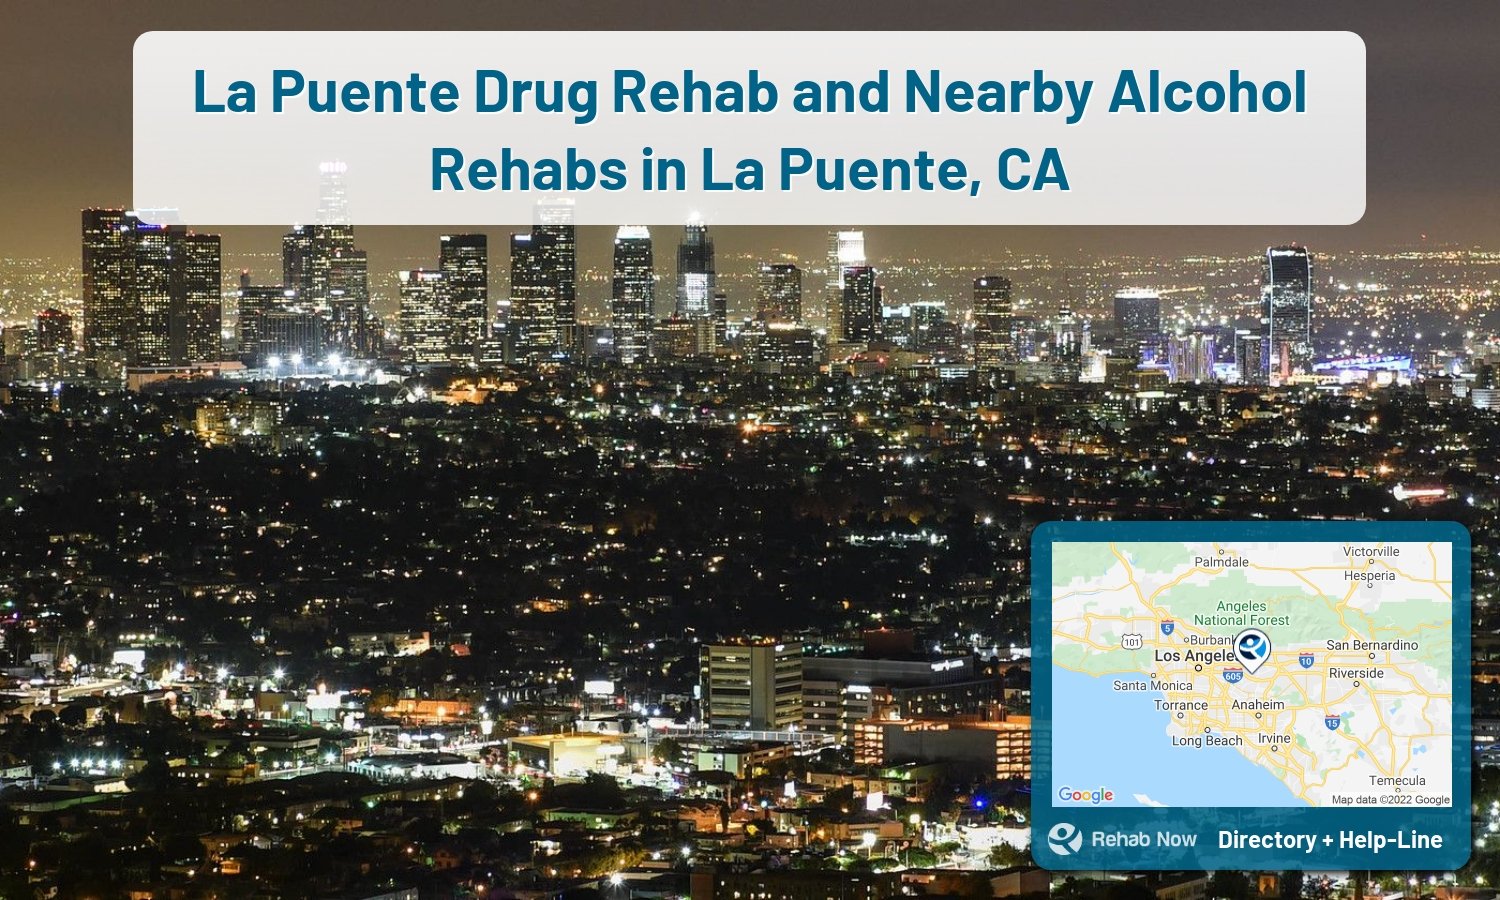 La Puente, CA Treatment Centers. Find drug rehab in La Puente, California, or detox and treatment programs. Get the right help now!